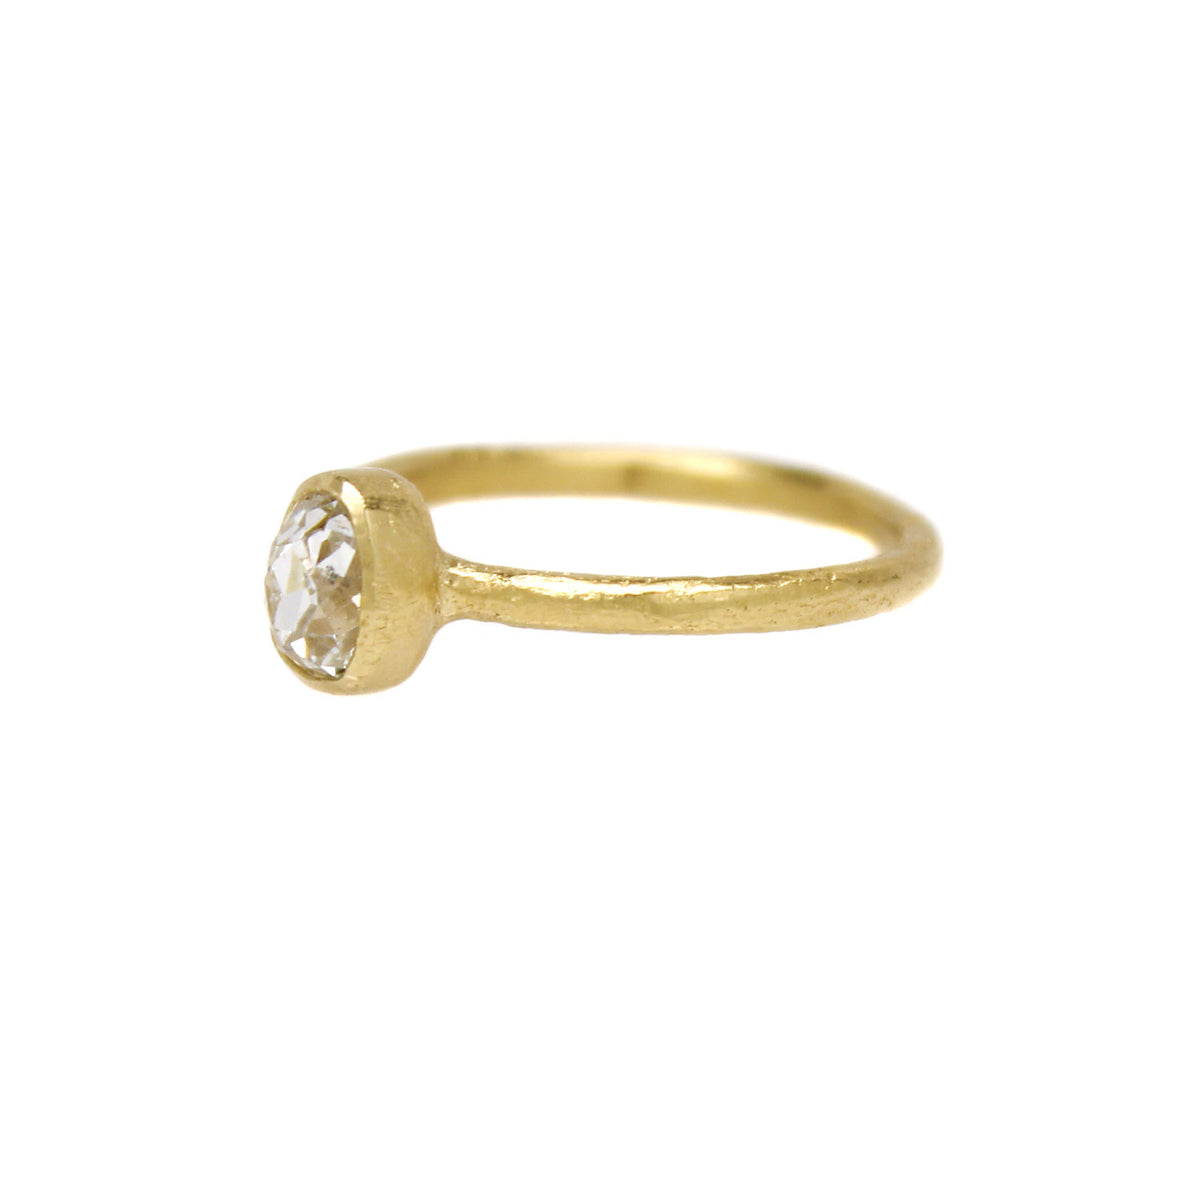 Textured Rail Ring with One-of-a-Kind Antique Pear Shaped Diamond